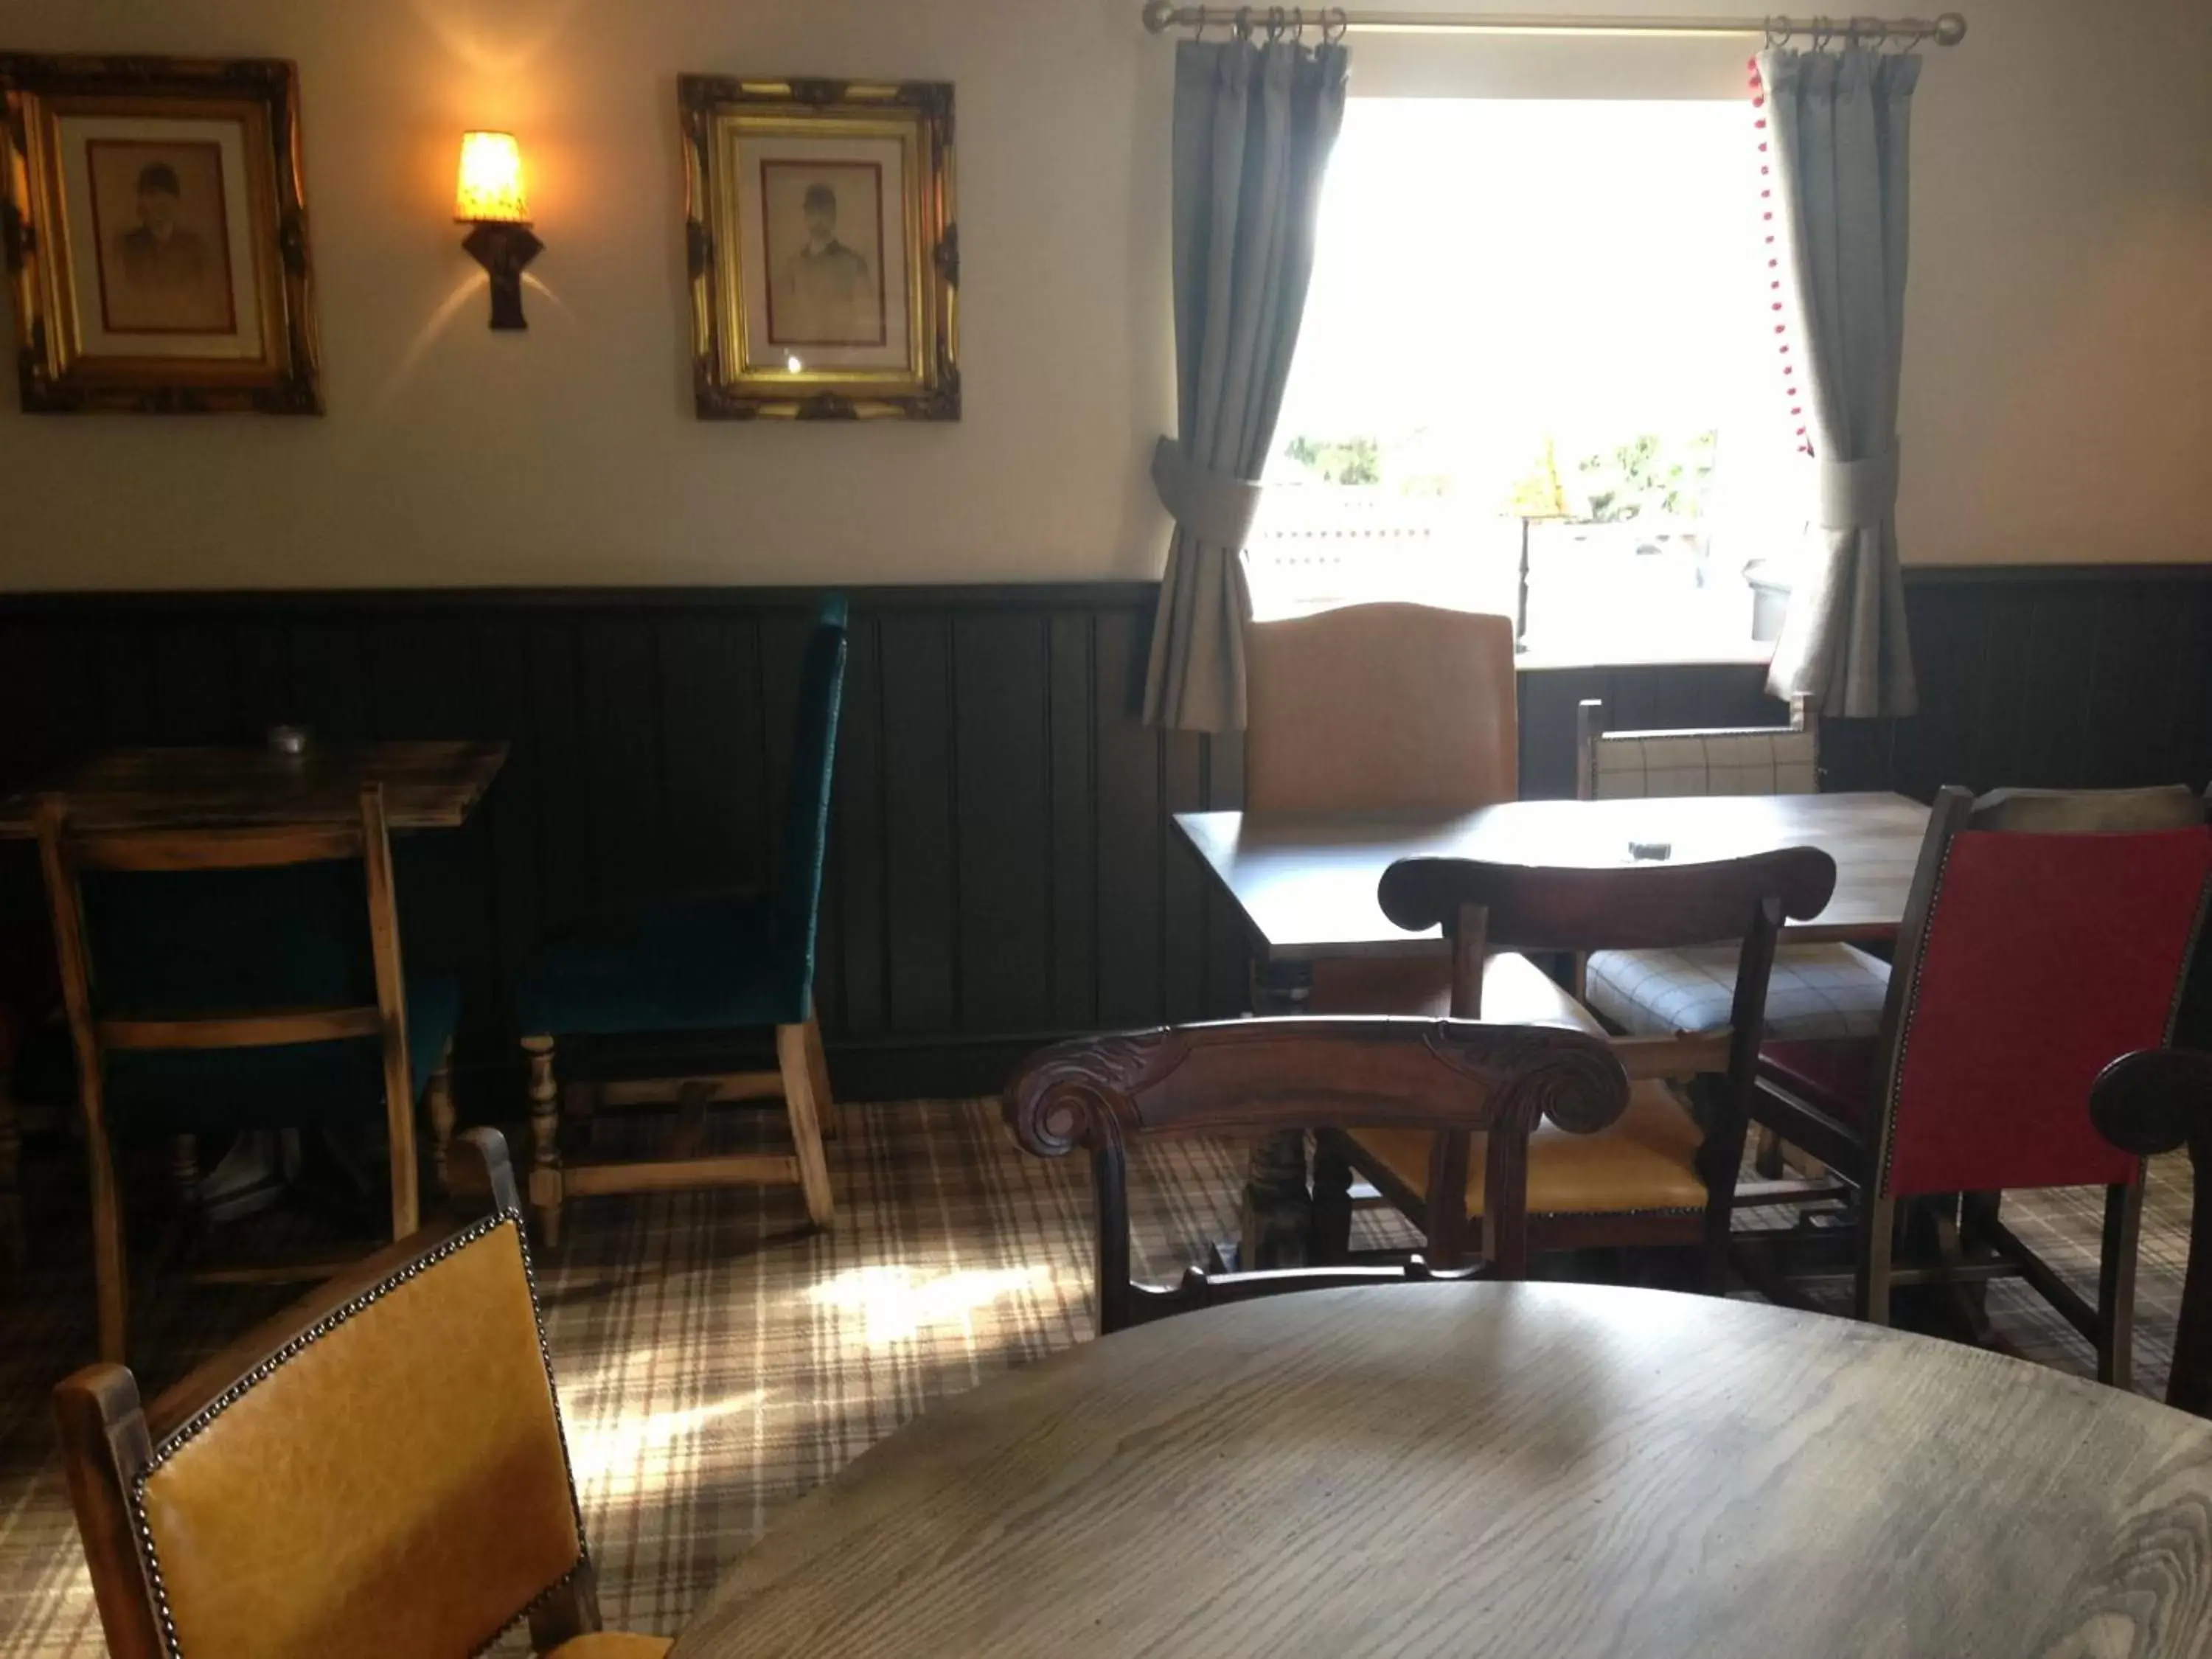 Restaurant/places to eat, Seating Area in The Crown Pub, Dining & Rooms